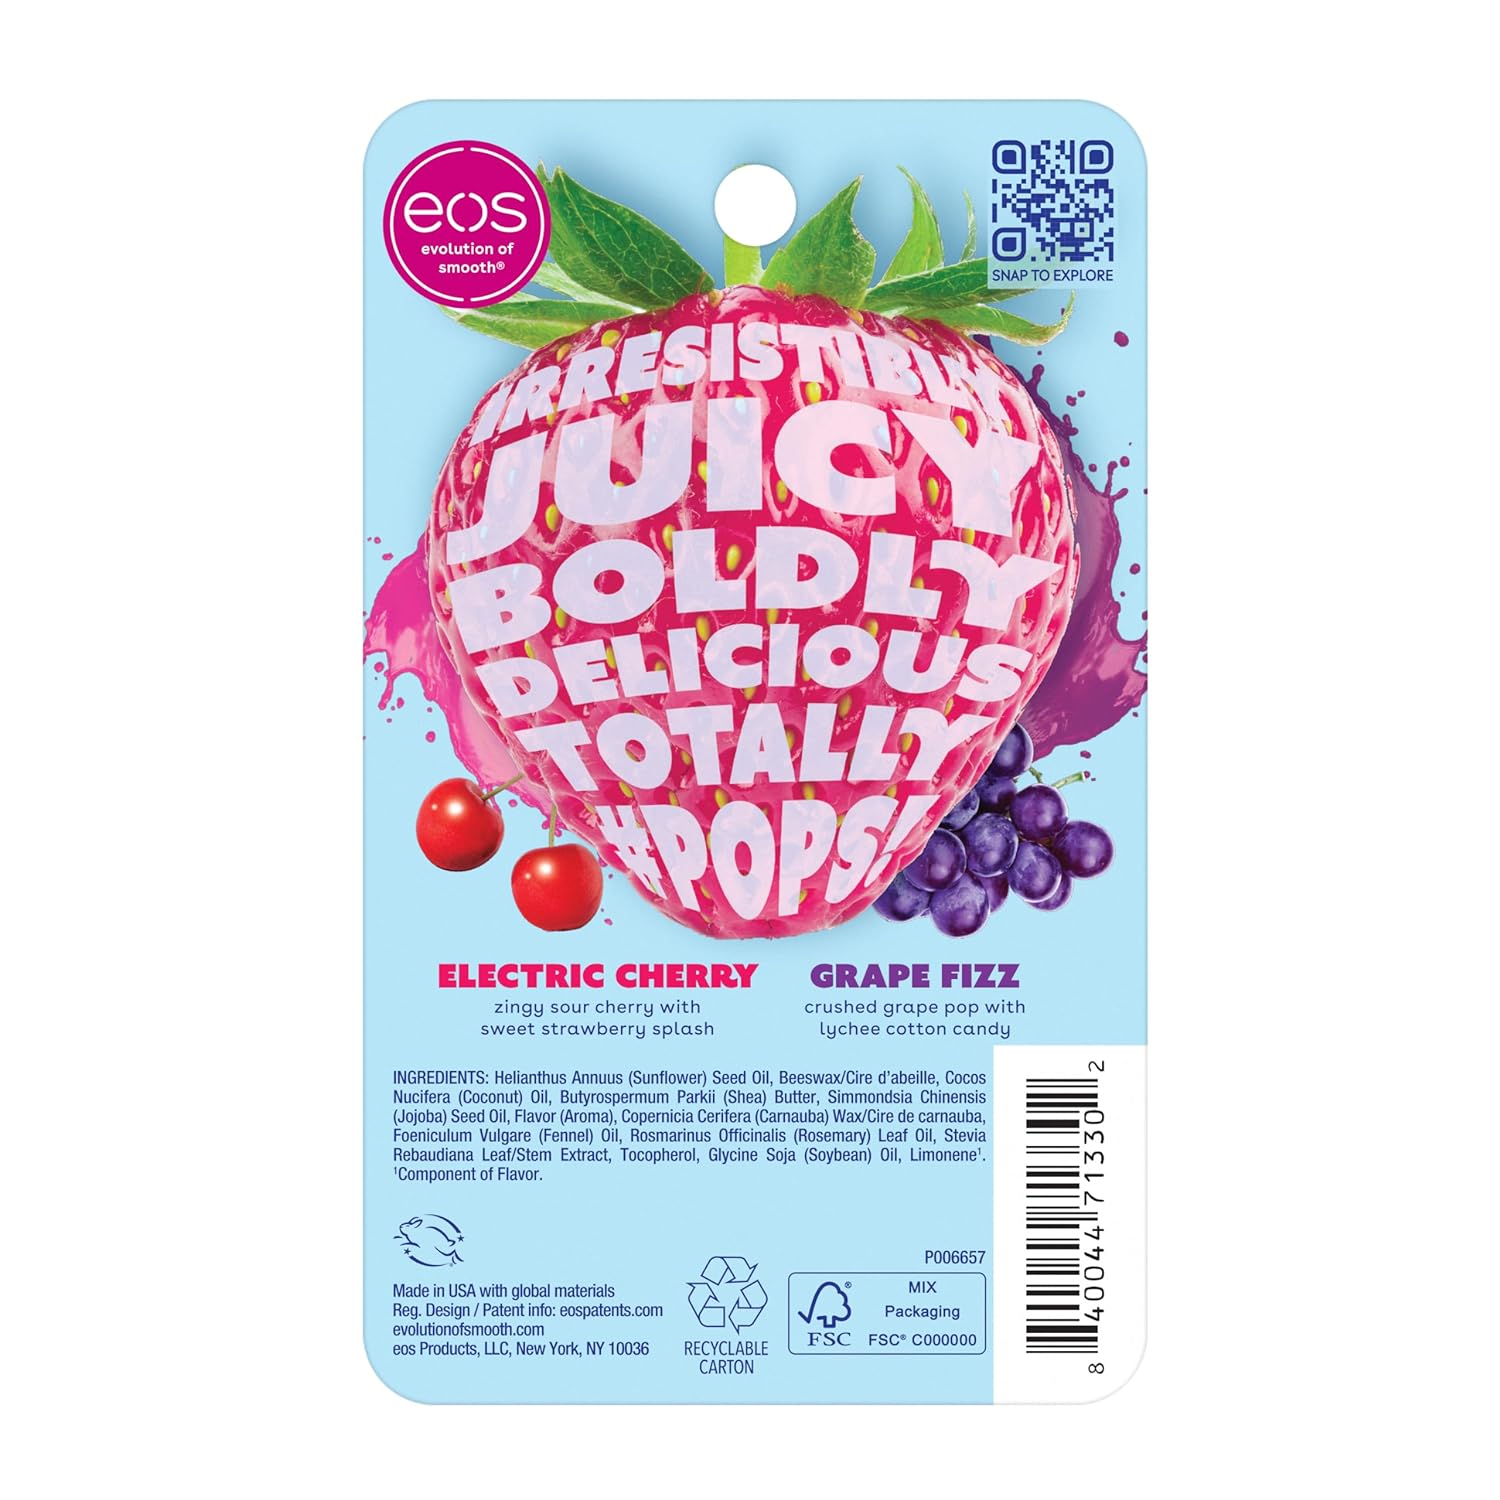 eos FlavorLab Pops! Lip Balm- Electric Cherry & Grape Fizz, Limited-Edition, 0.14 oz, 2-Pack : Beauty & Personal Care